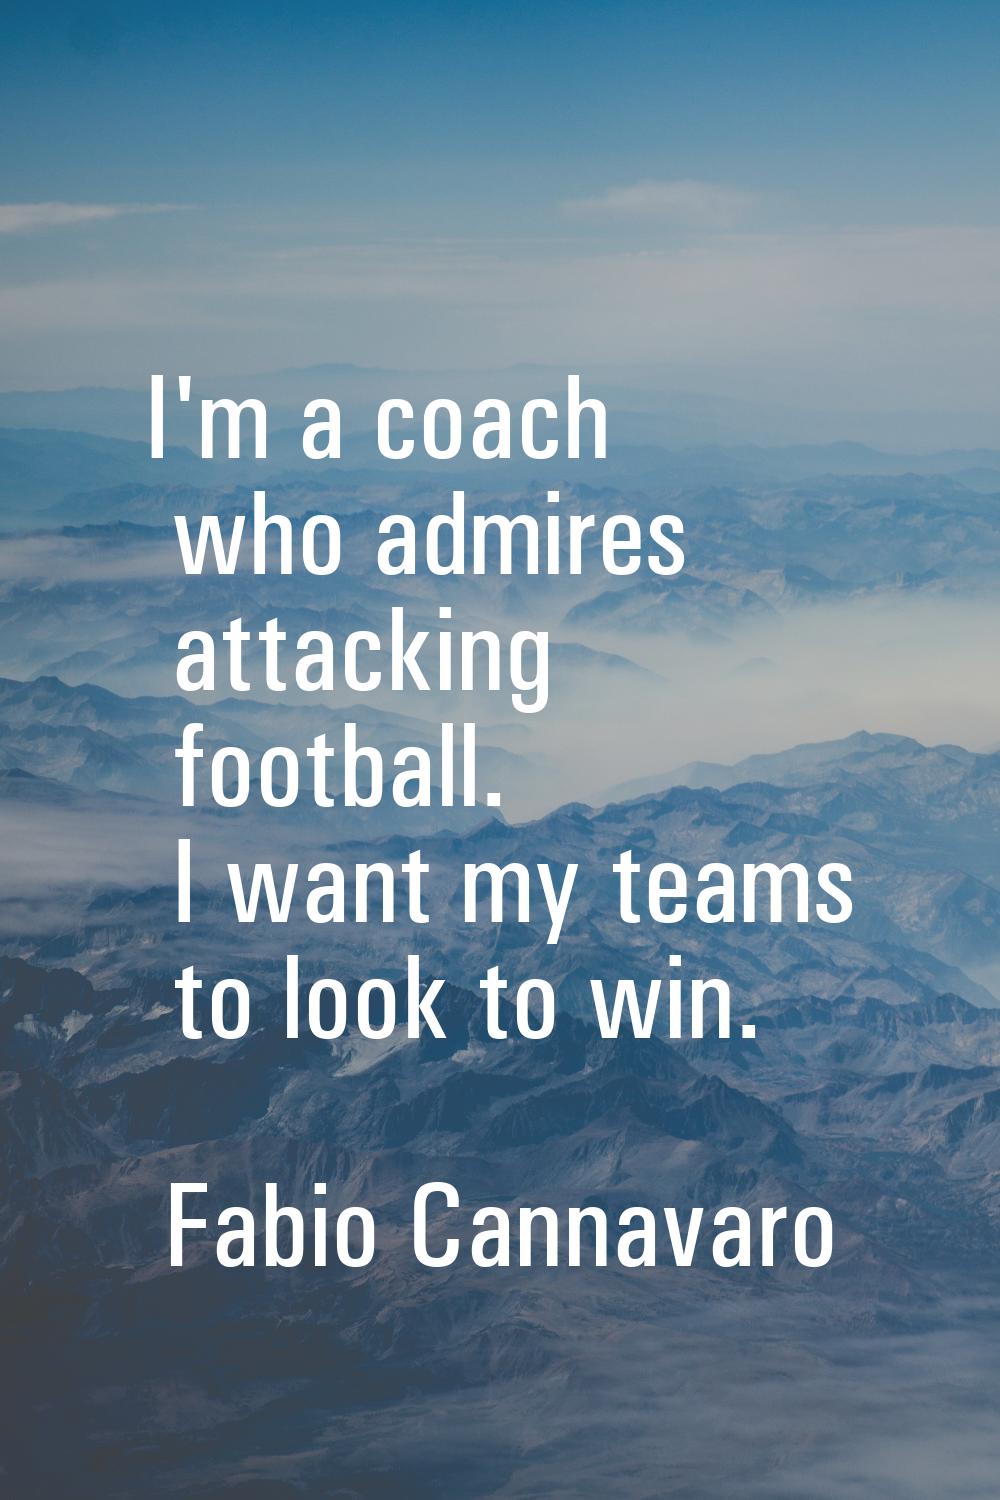 I'm a coach who admires attacking football. I want my teams to look to win.